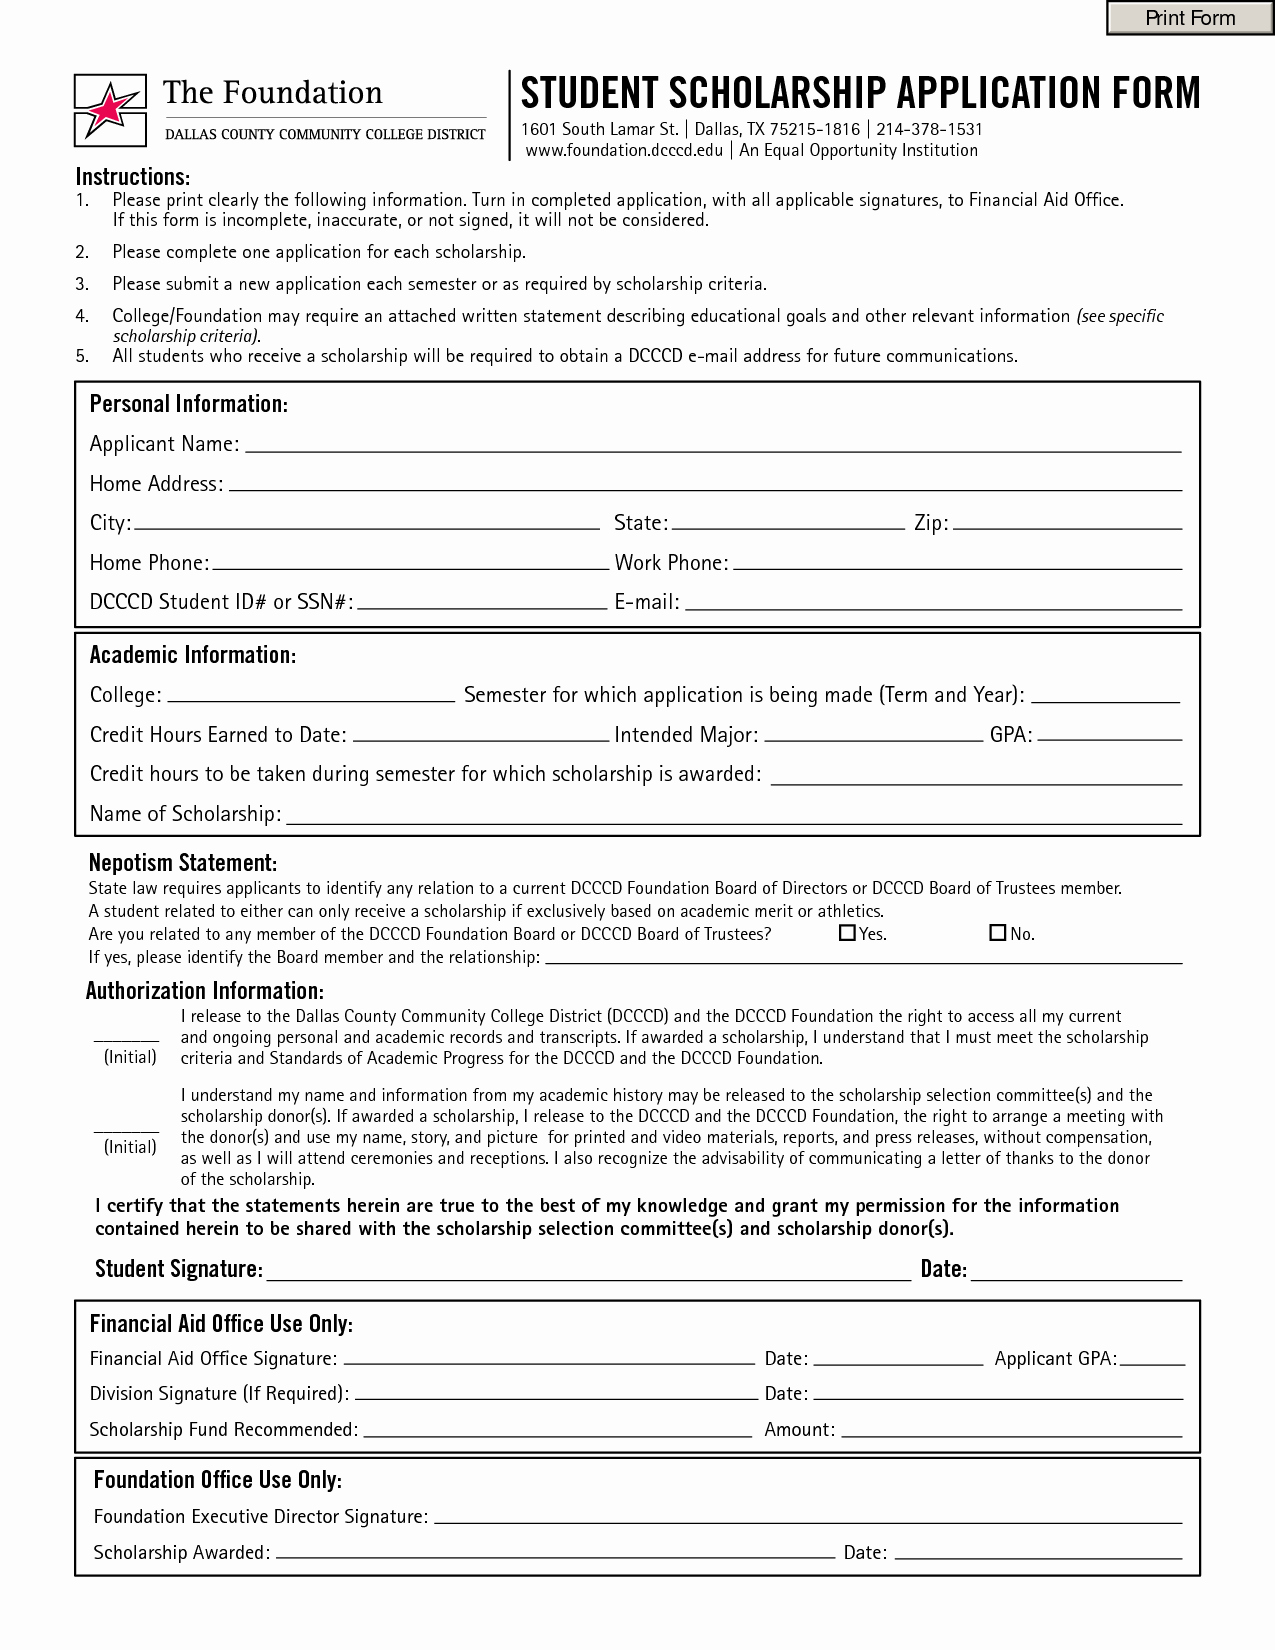 scholarship application form template